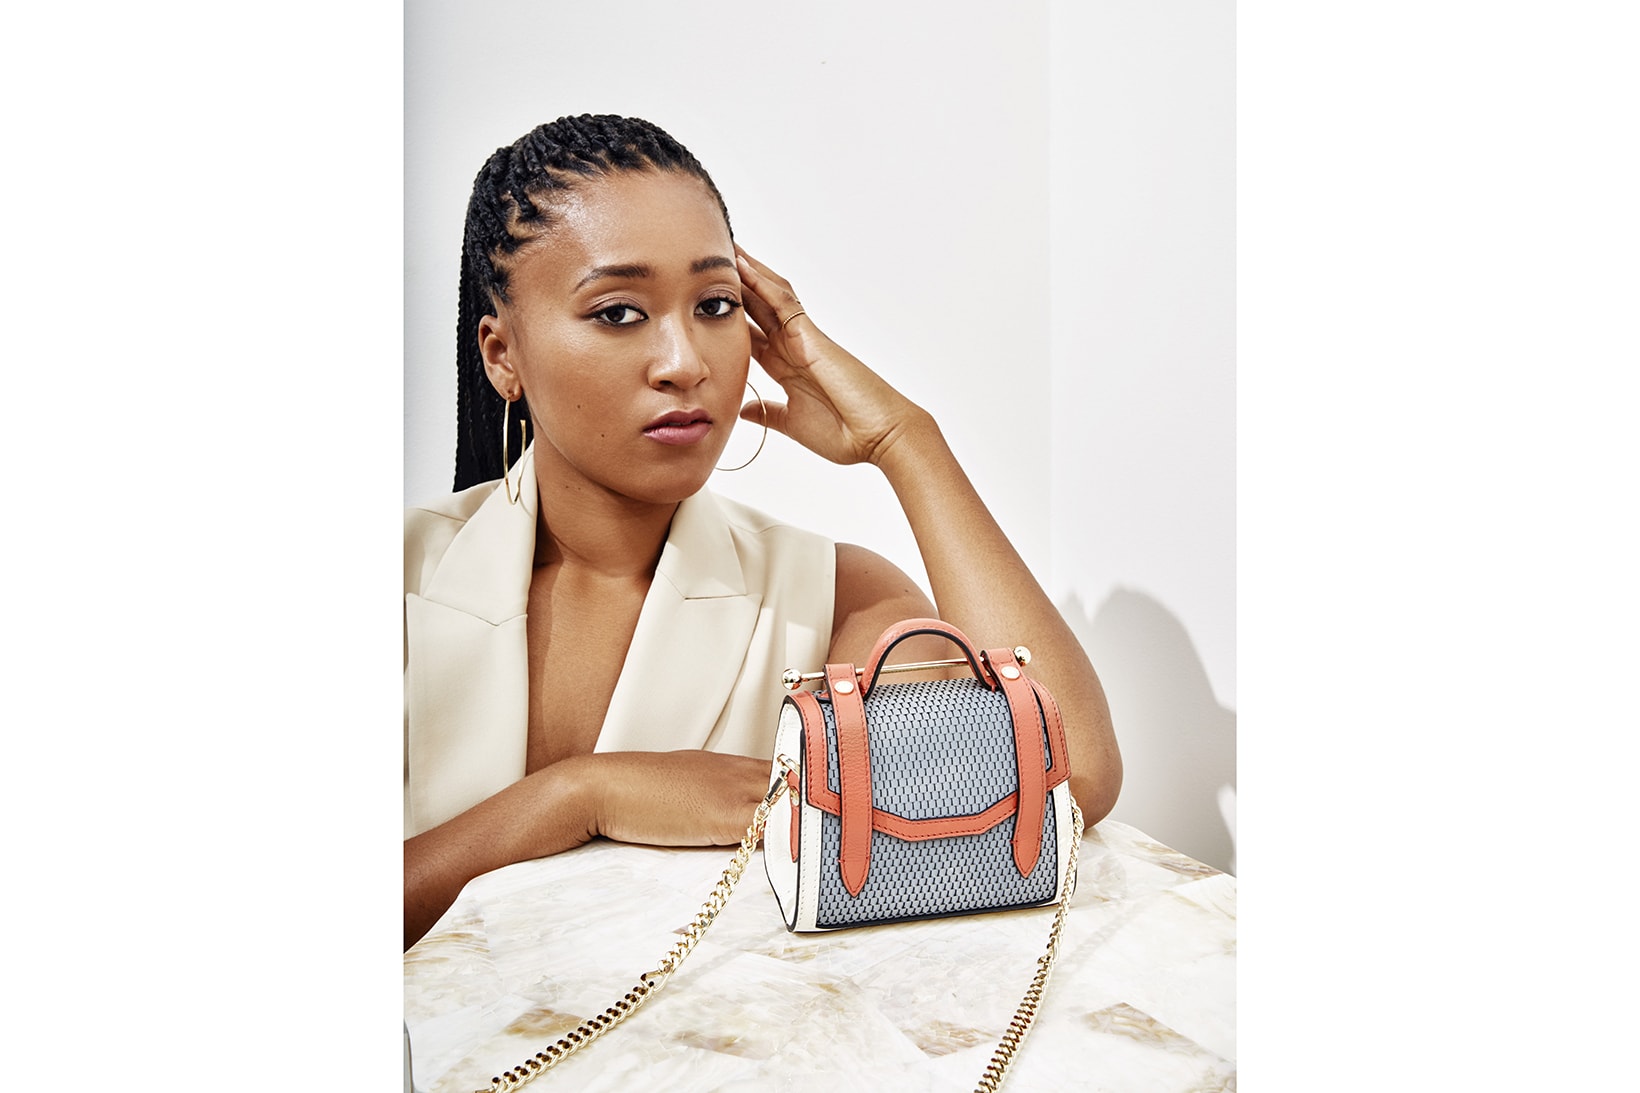 Naomi Osaka x Strathberry Bag Collaboration Collection Campaign Ace Allegro